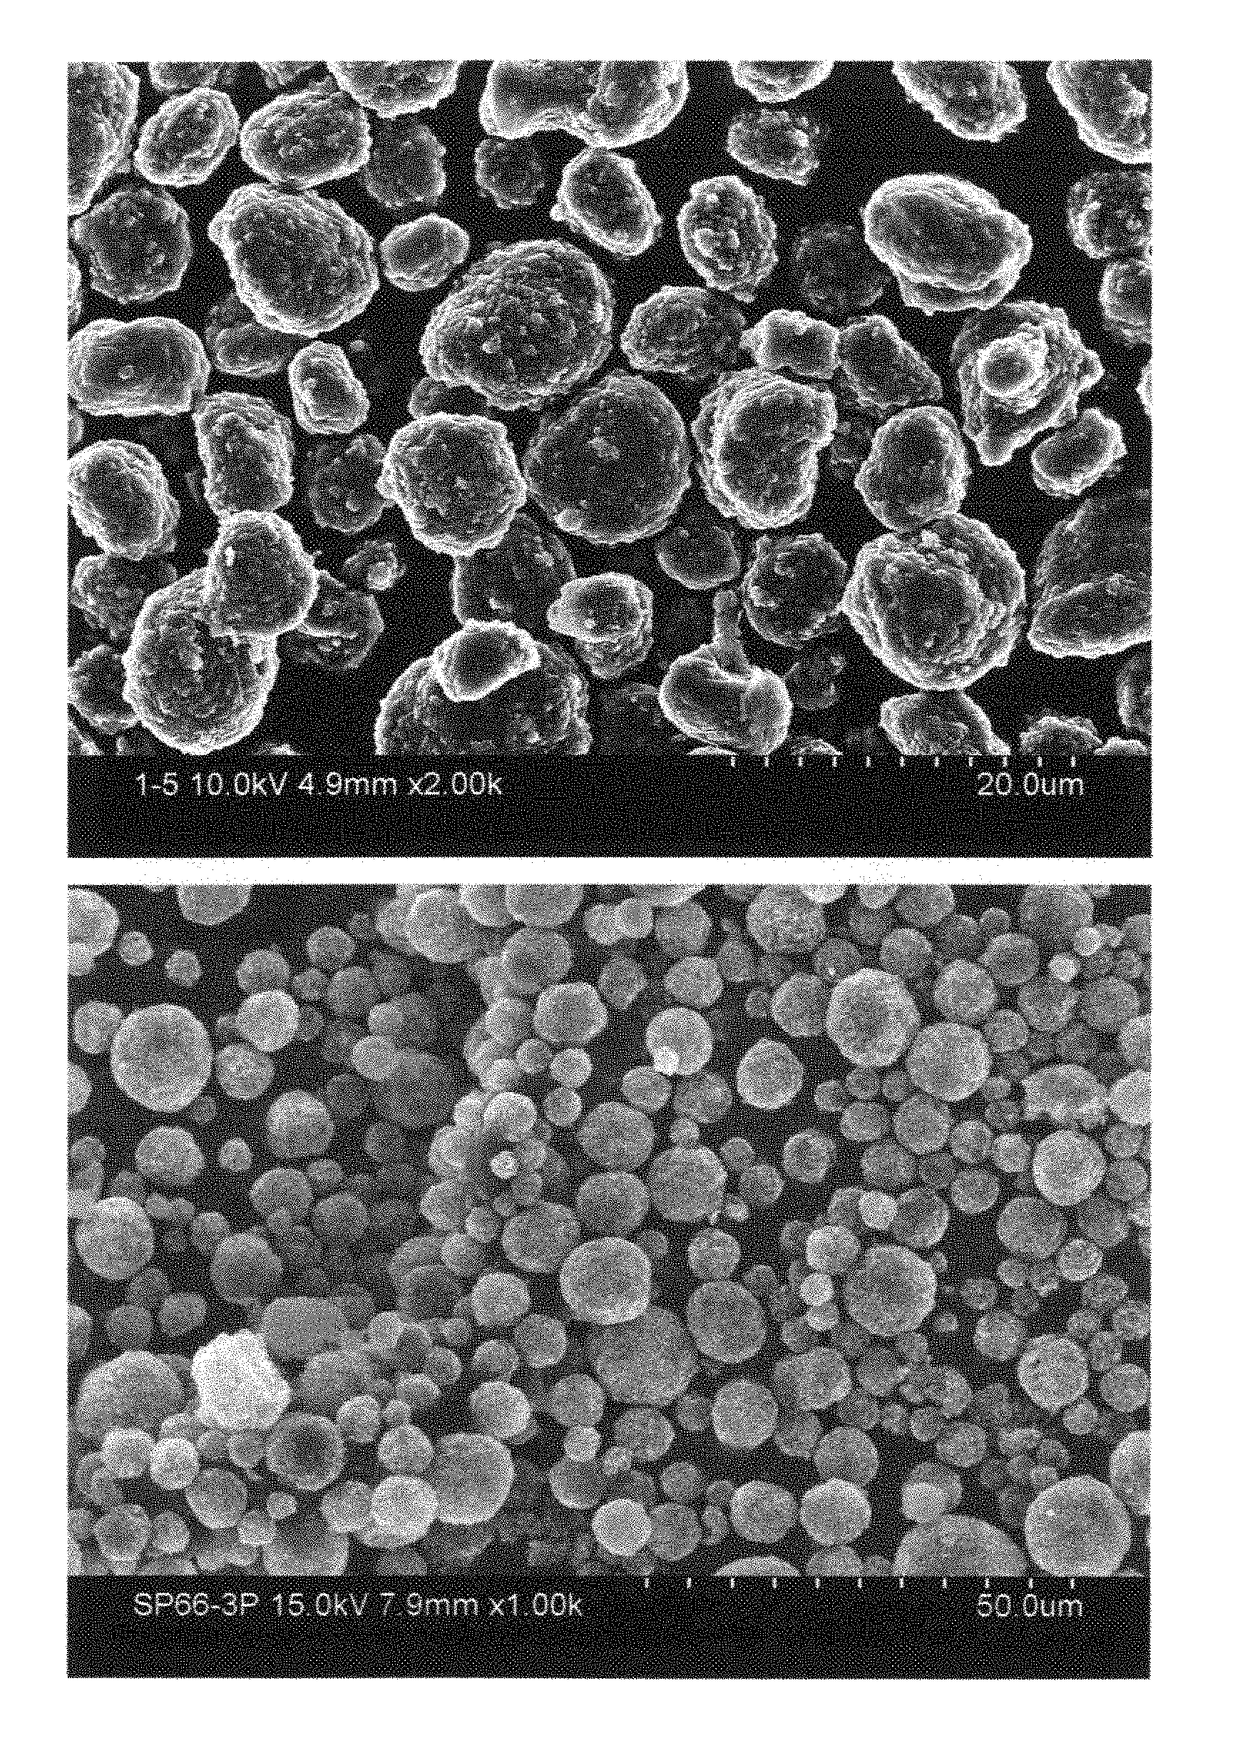 Encapsulated phthalocyanine particles, high-capacity cathode containing these particles, and rechargeable lithium cell containing such a cathode